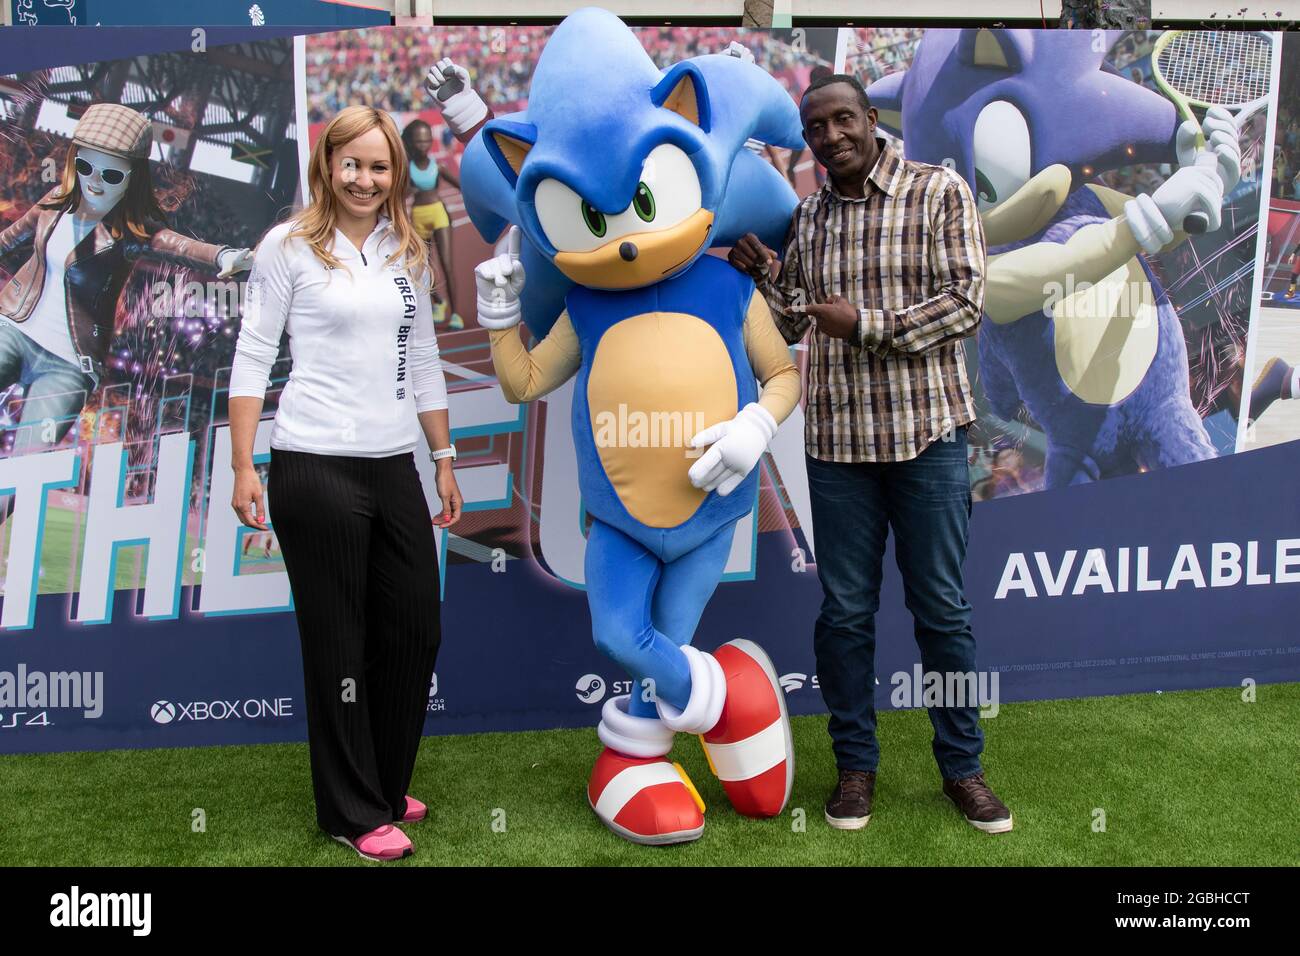 Team GB Athletes Joanna Roswell who is a double Olympic gold medalist in cycling and Linford Christie who is a gold and sliver medalist in sprinting, launch the Official Olympic game with the help of Sonic The Hedgehog at Team GB Fanzone at Westfield White City, West London, UK. Stock Photo